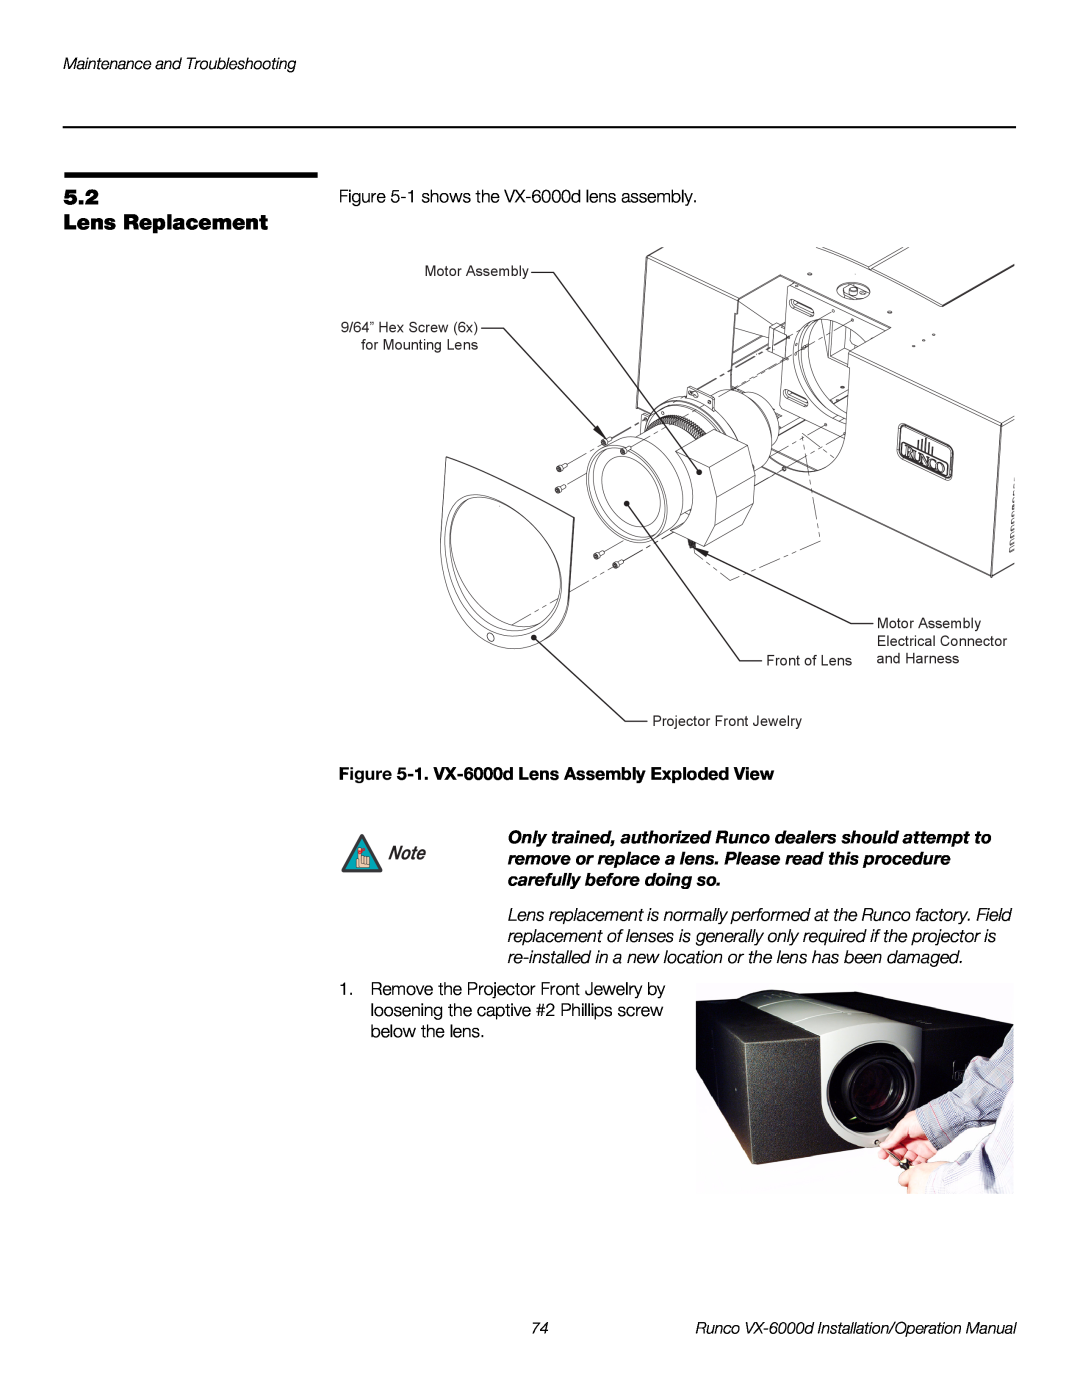 Runco VX-6000D operation manual Lens Replacement, 1. VX-6000d Lens Assembly Exploded View, Maintenance and Troubleshooting 